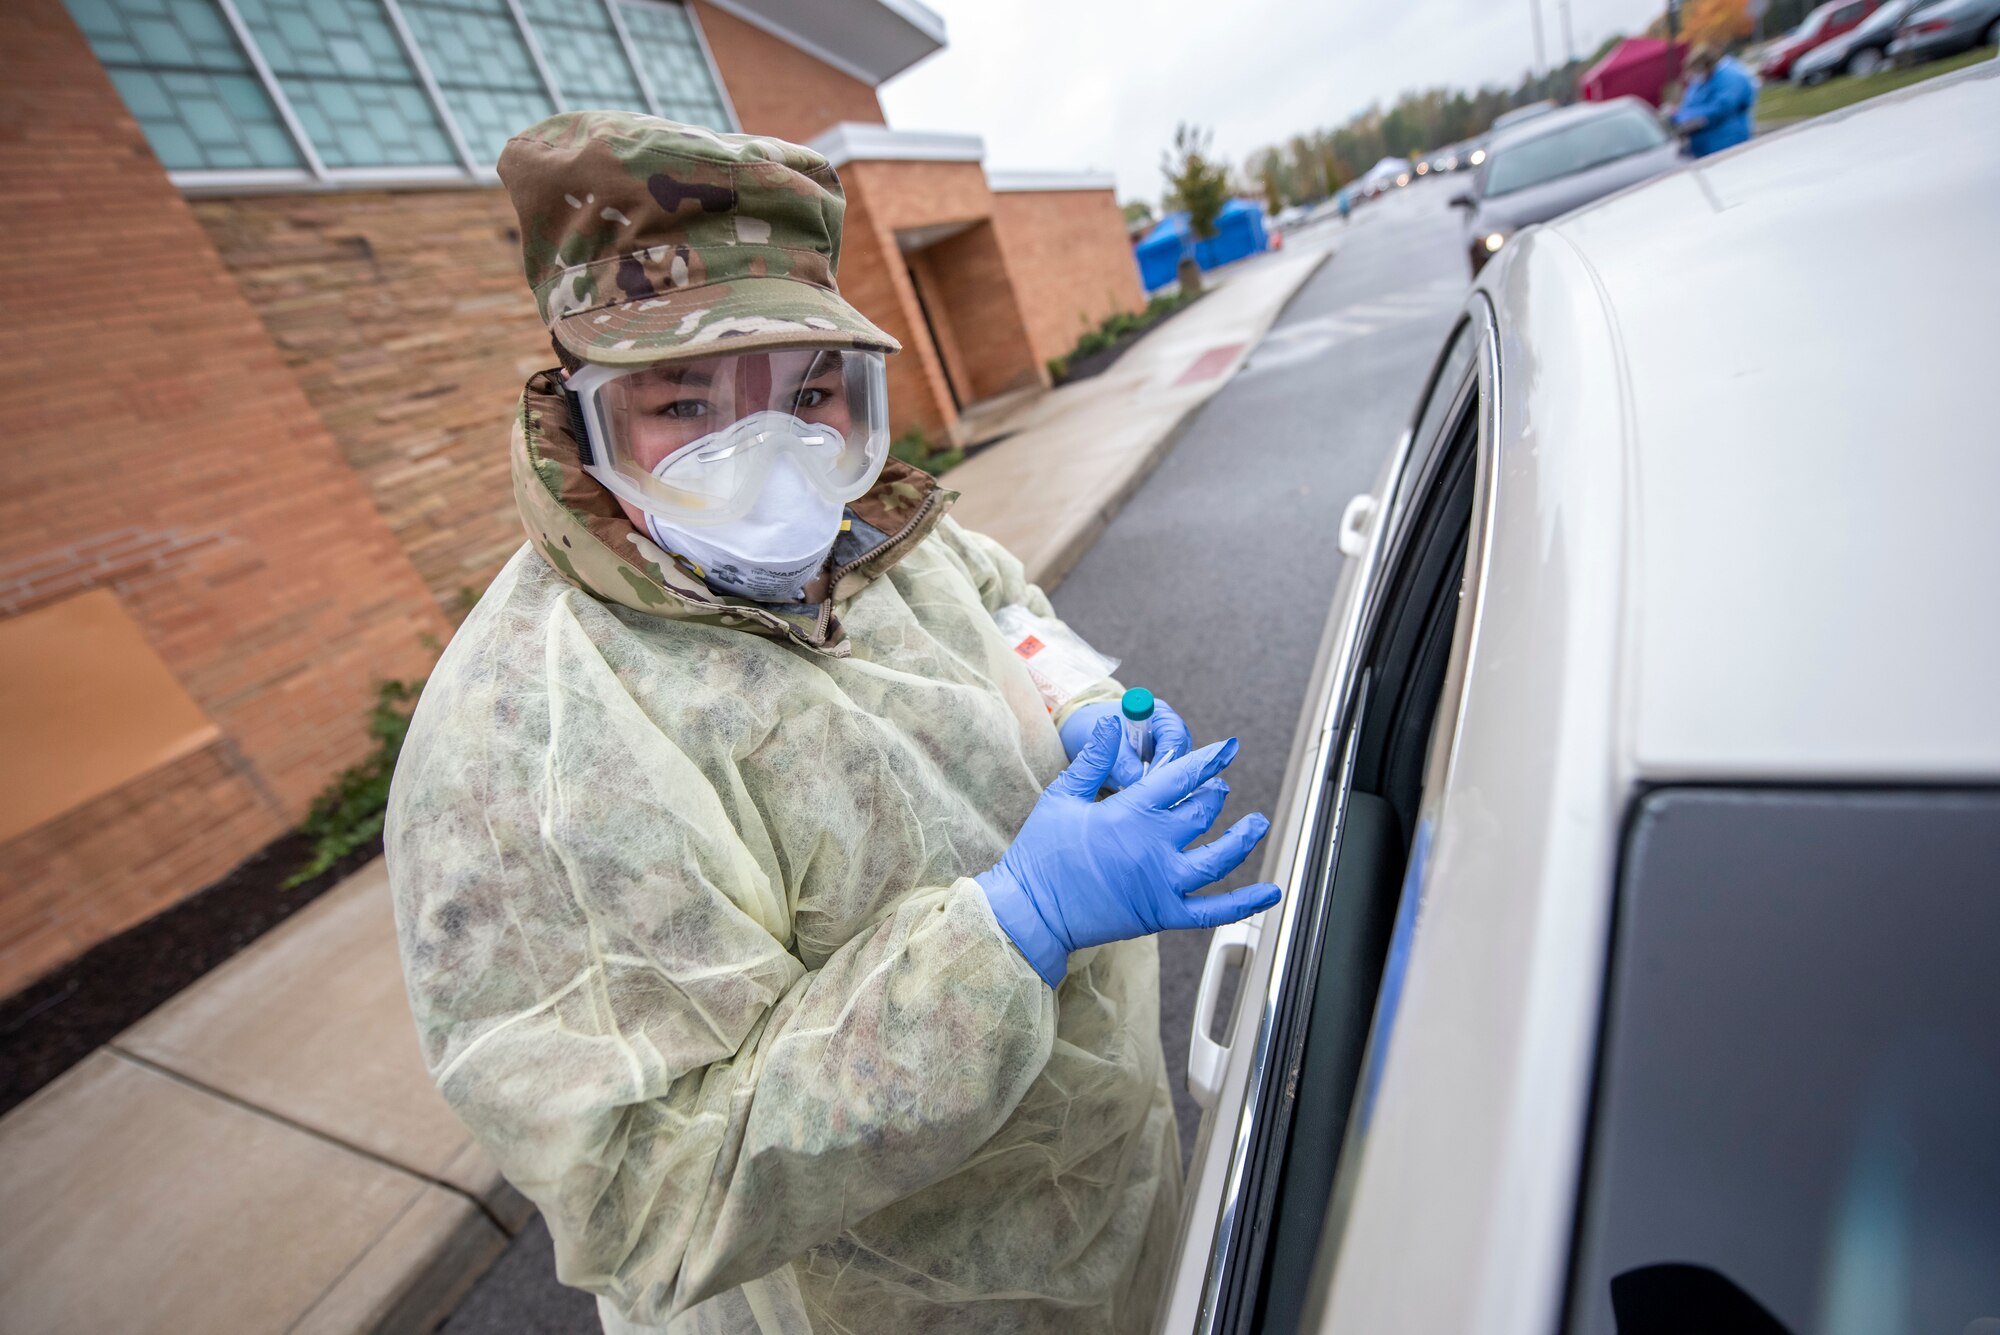 Cpl. Nikki Sherman, a Soldier assigned to the Ohio Military Reserve, performs a COVID-19 test during a pop-up testing drive-thru at Anthony Wayne Junior High School in Whitehouse, Ohio, Oct. 19, 2020.